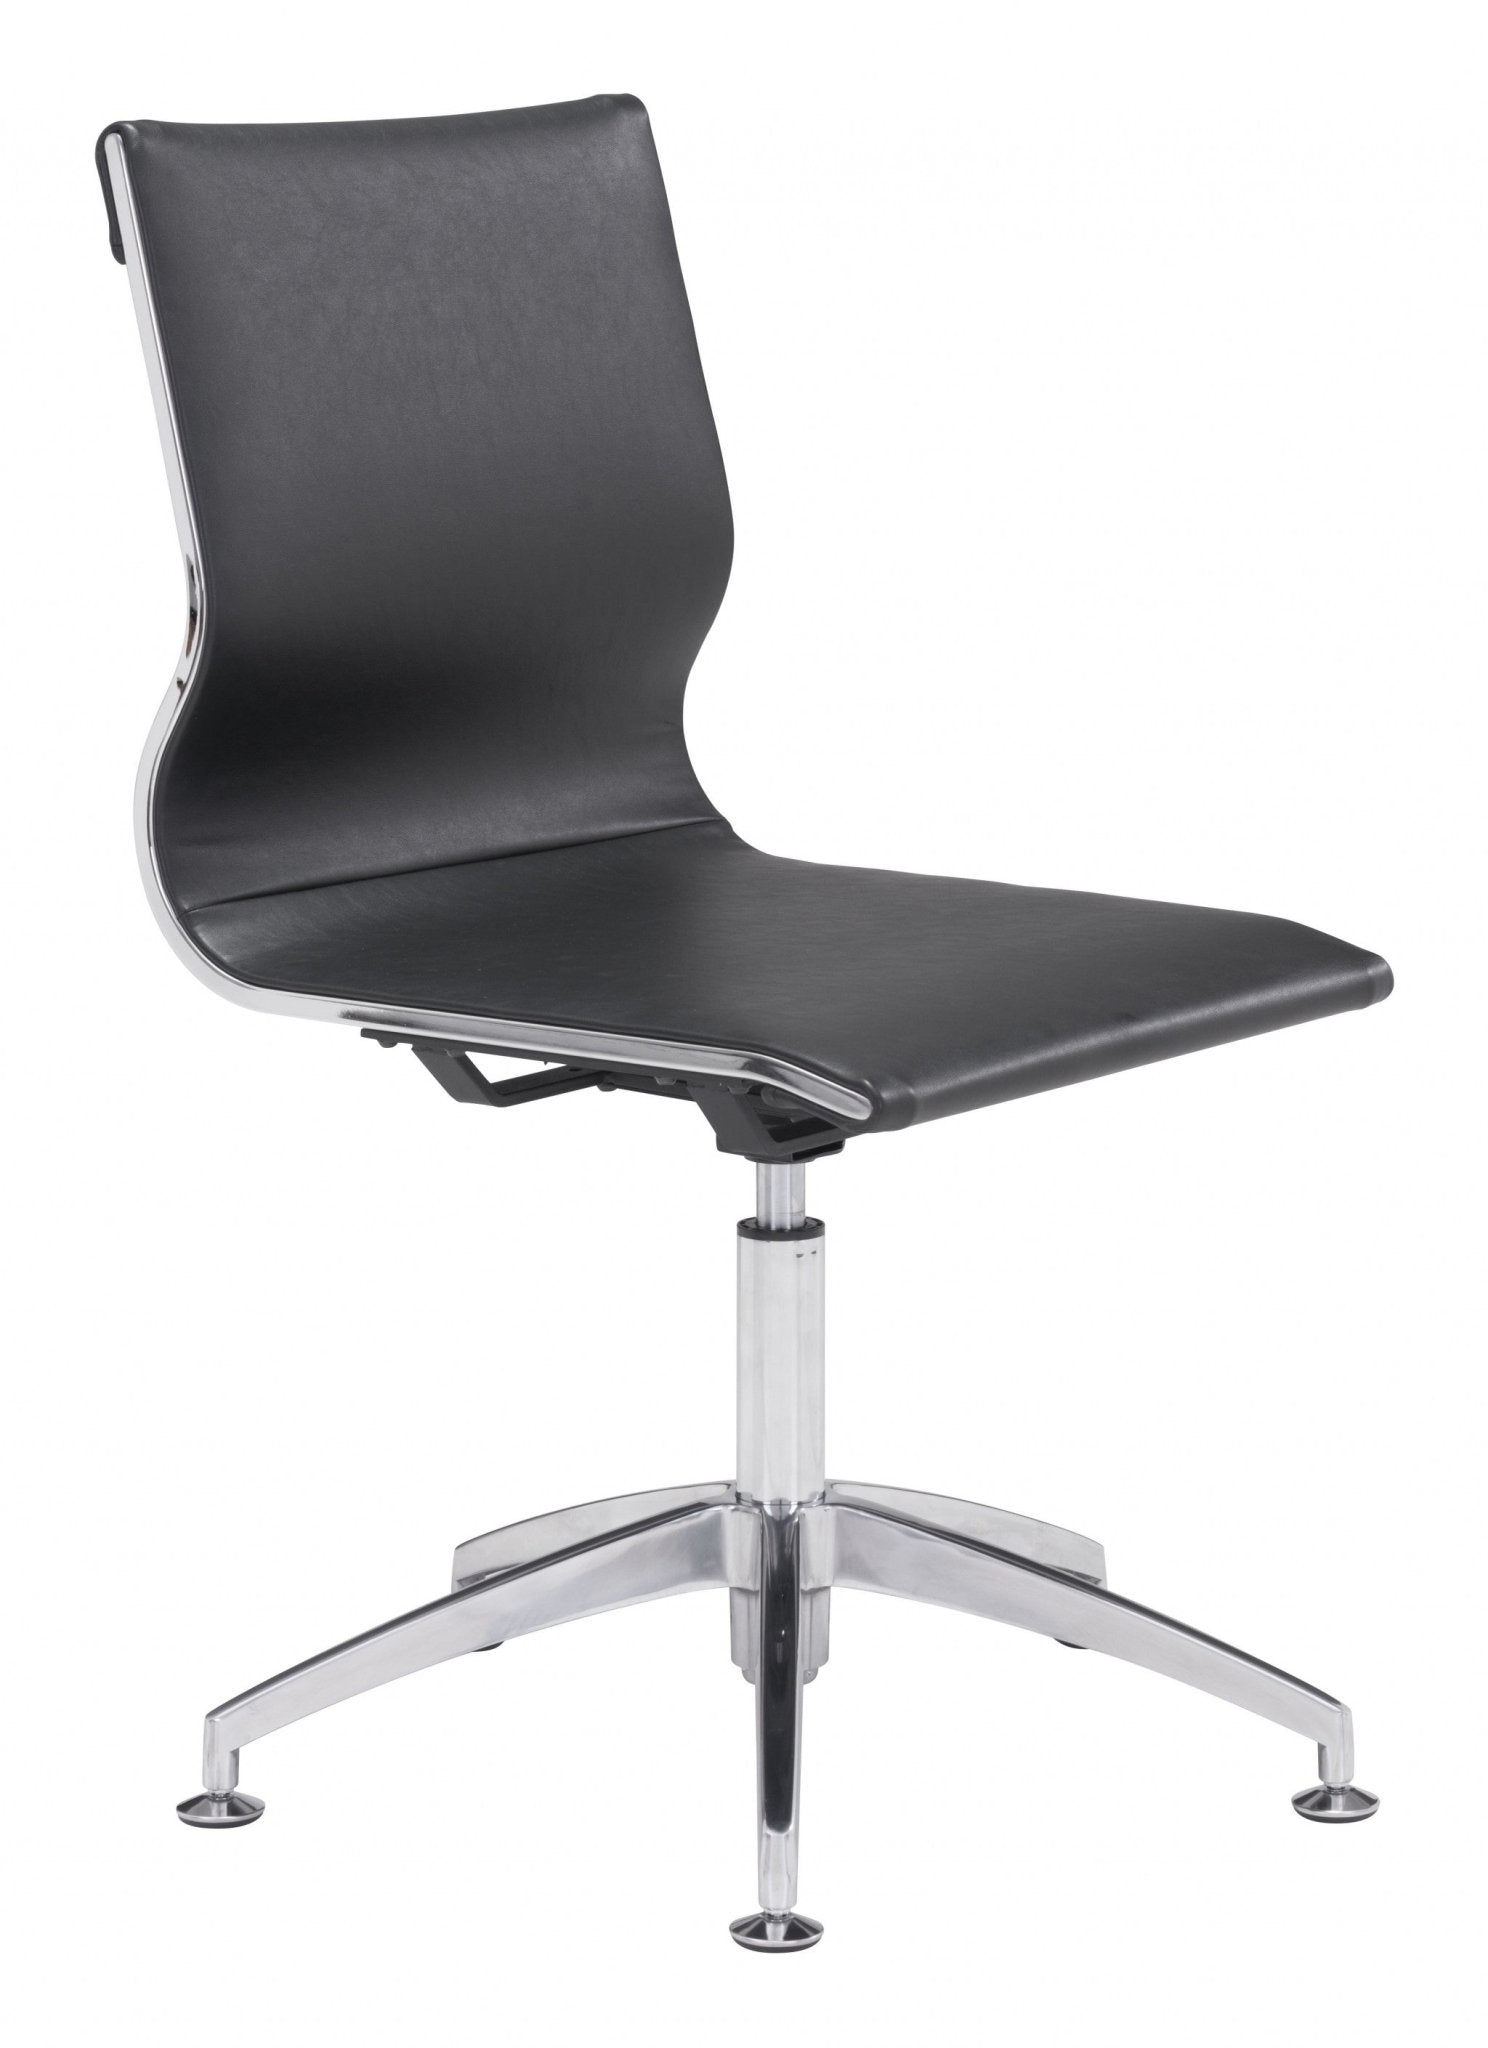 Black-Faux-Leather-Seat-Swivel-Adjustable-Conference-Chair-Metal-Back-Steel-Frame-Office-Chairs